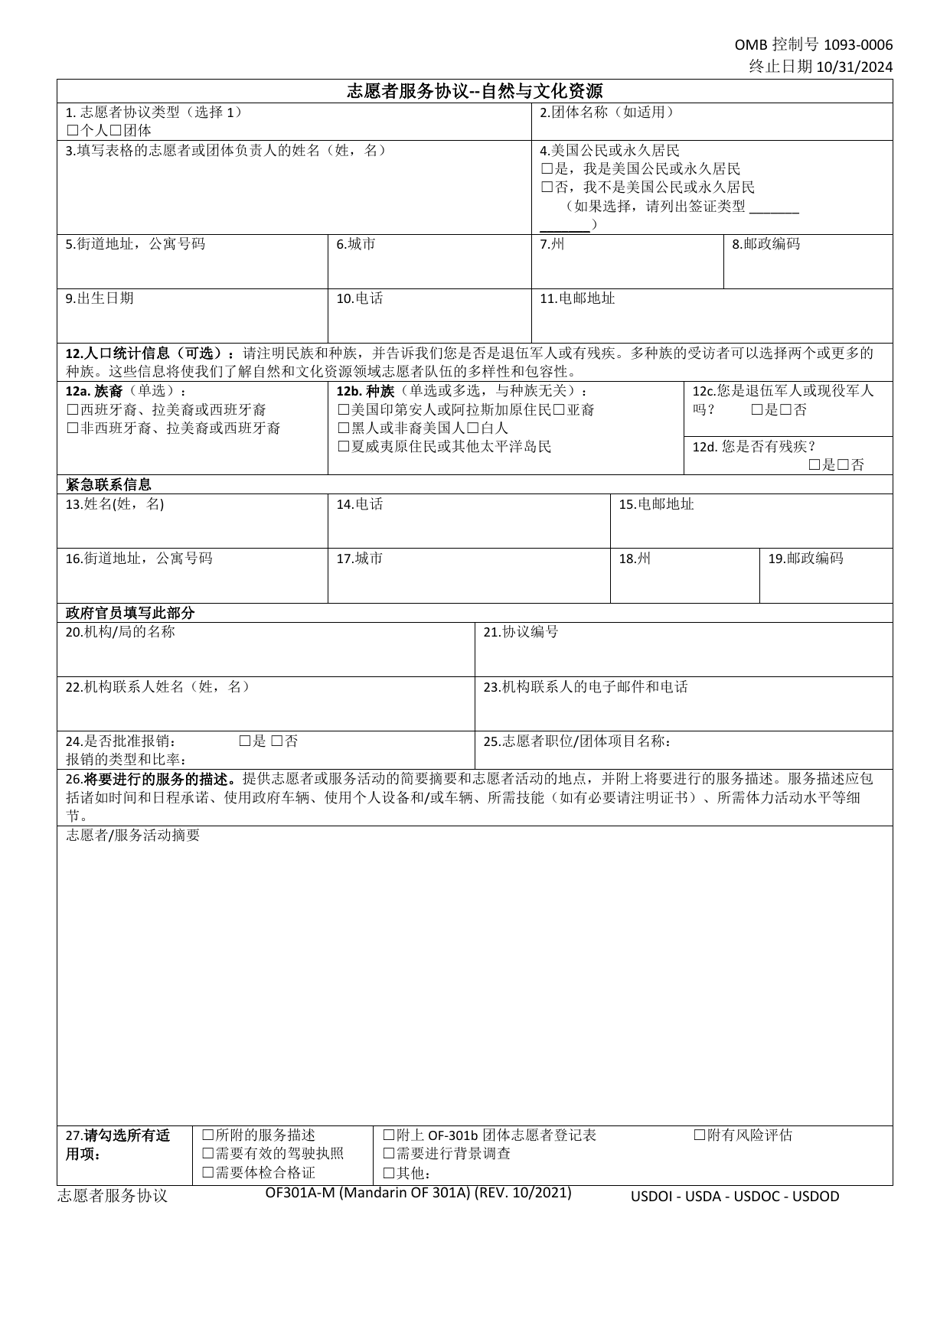 Form OF-301A-M Volunteer Service Agreement - Natural  Cultural Resources (Mandarin (Chinese)), Page 1